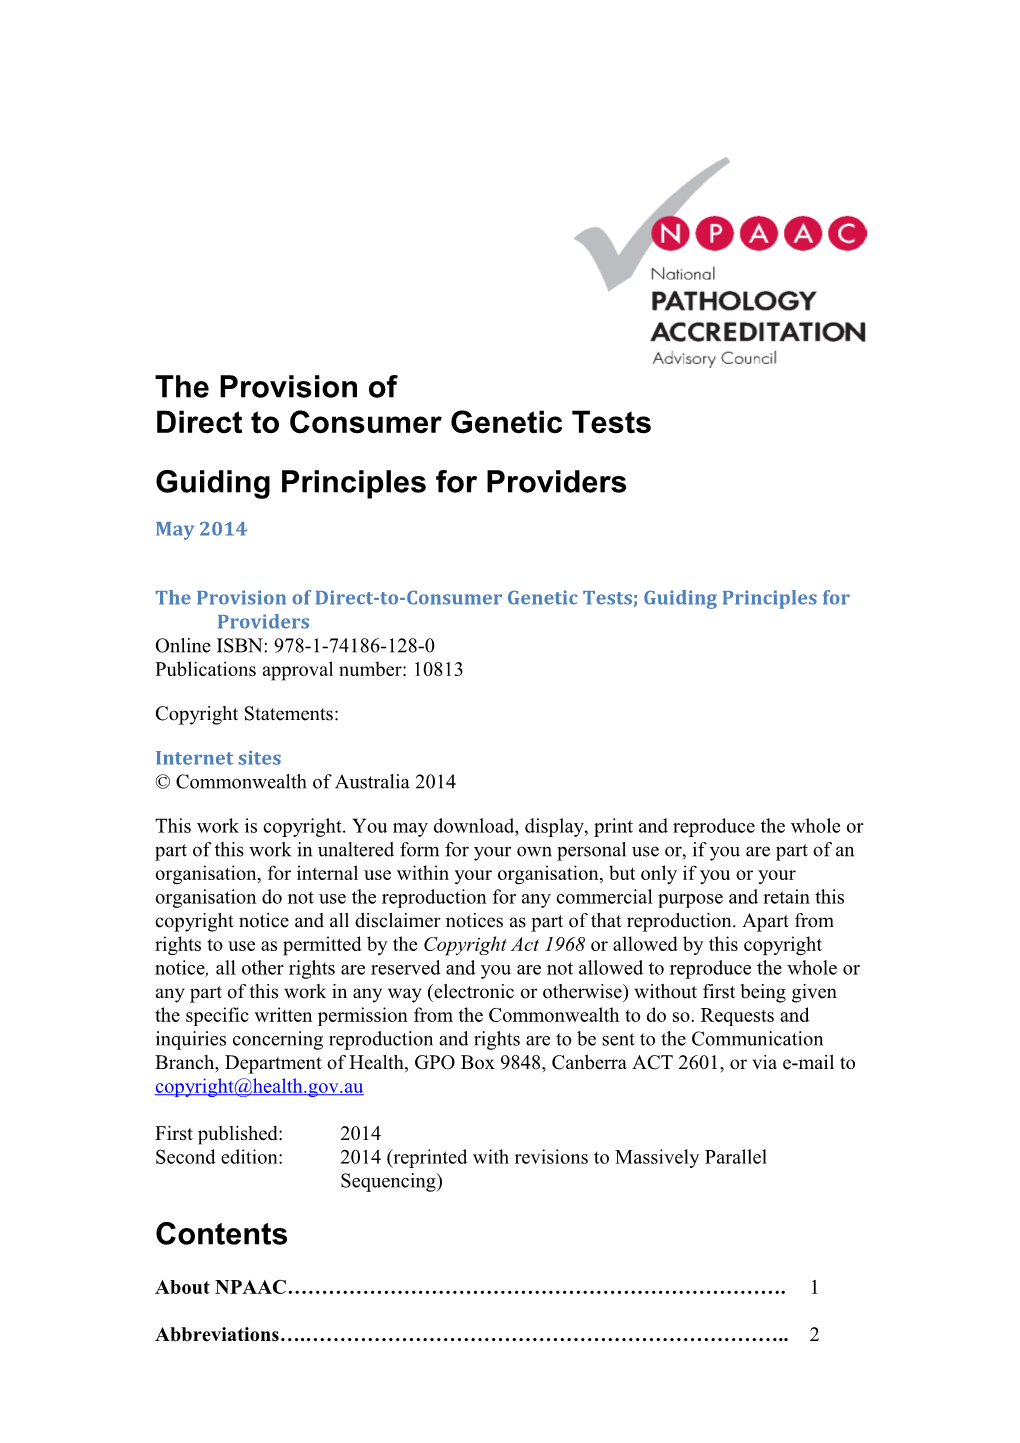 Direct to Consumer Genetic Tests